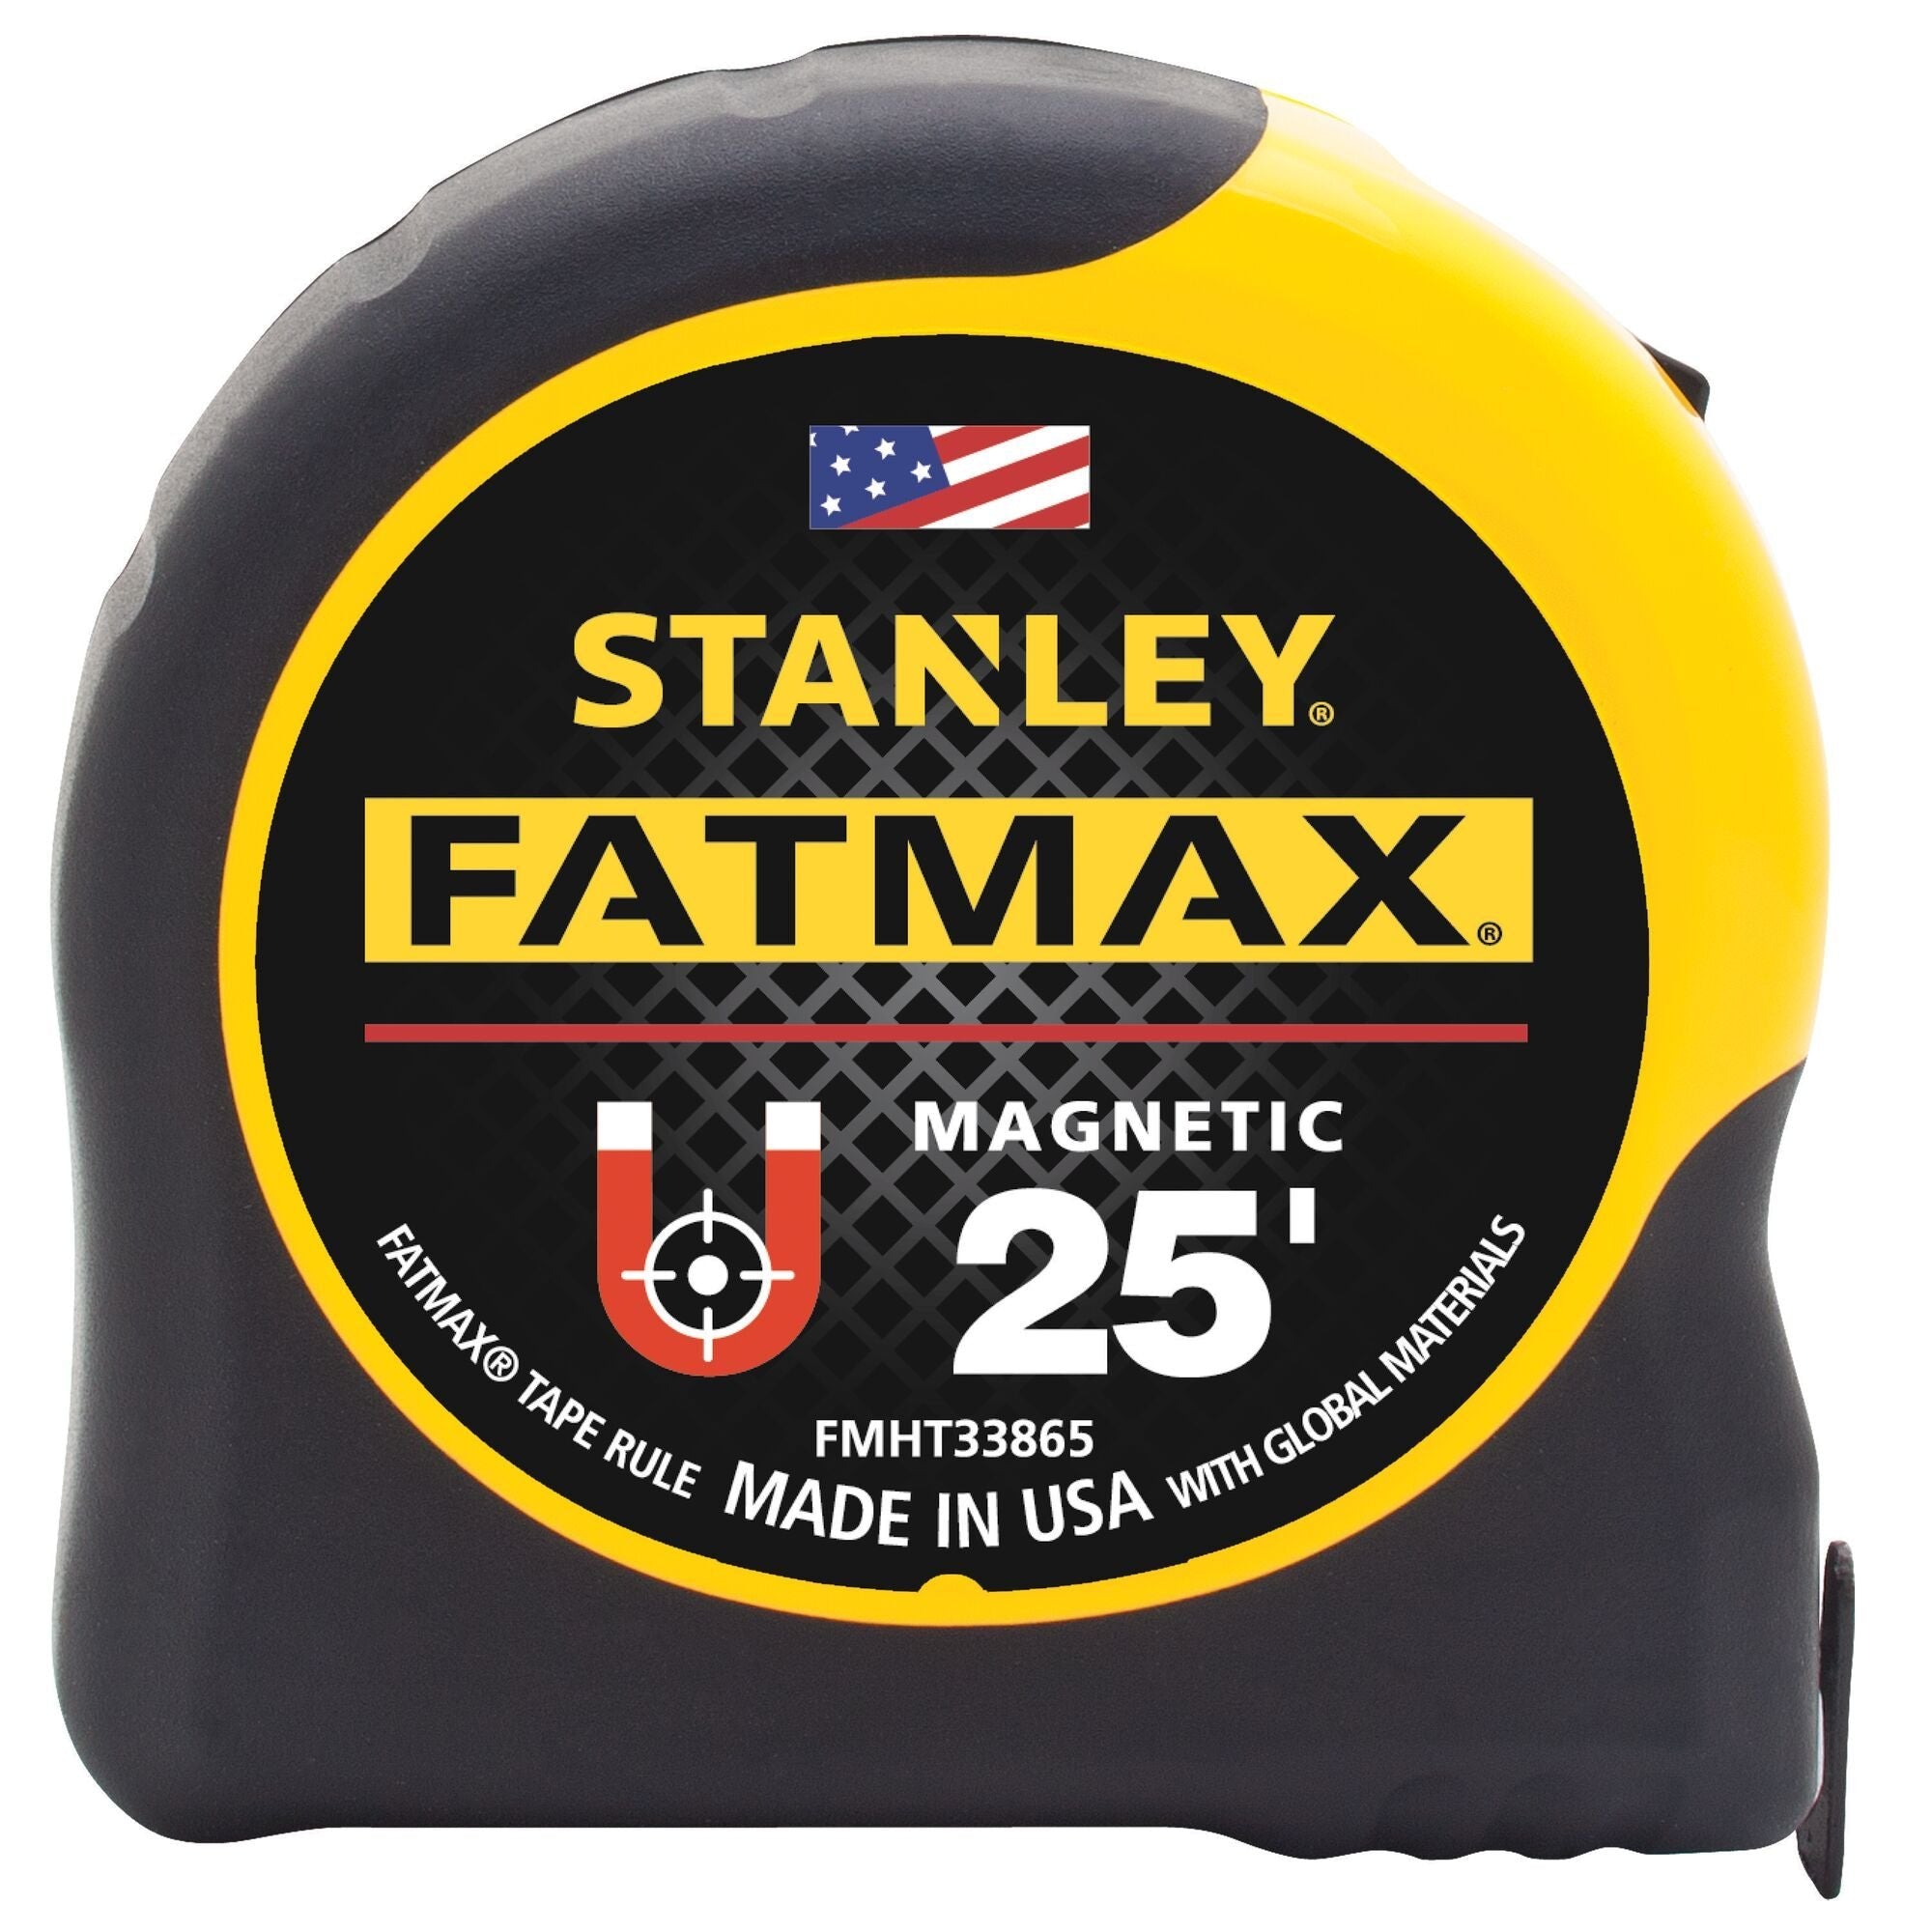 STANLEY FMHT33865 25 ft STANLEY® FATMAX® Magnetic Tape